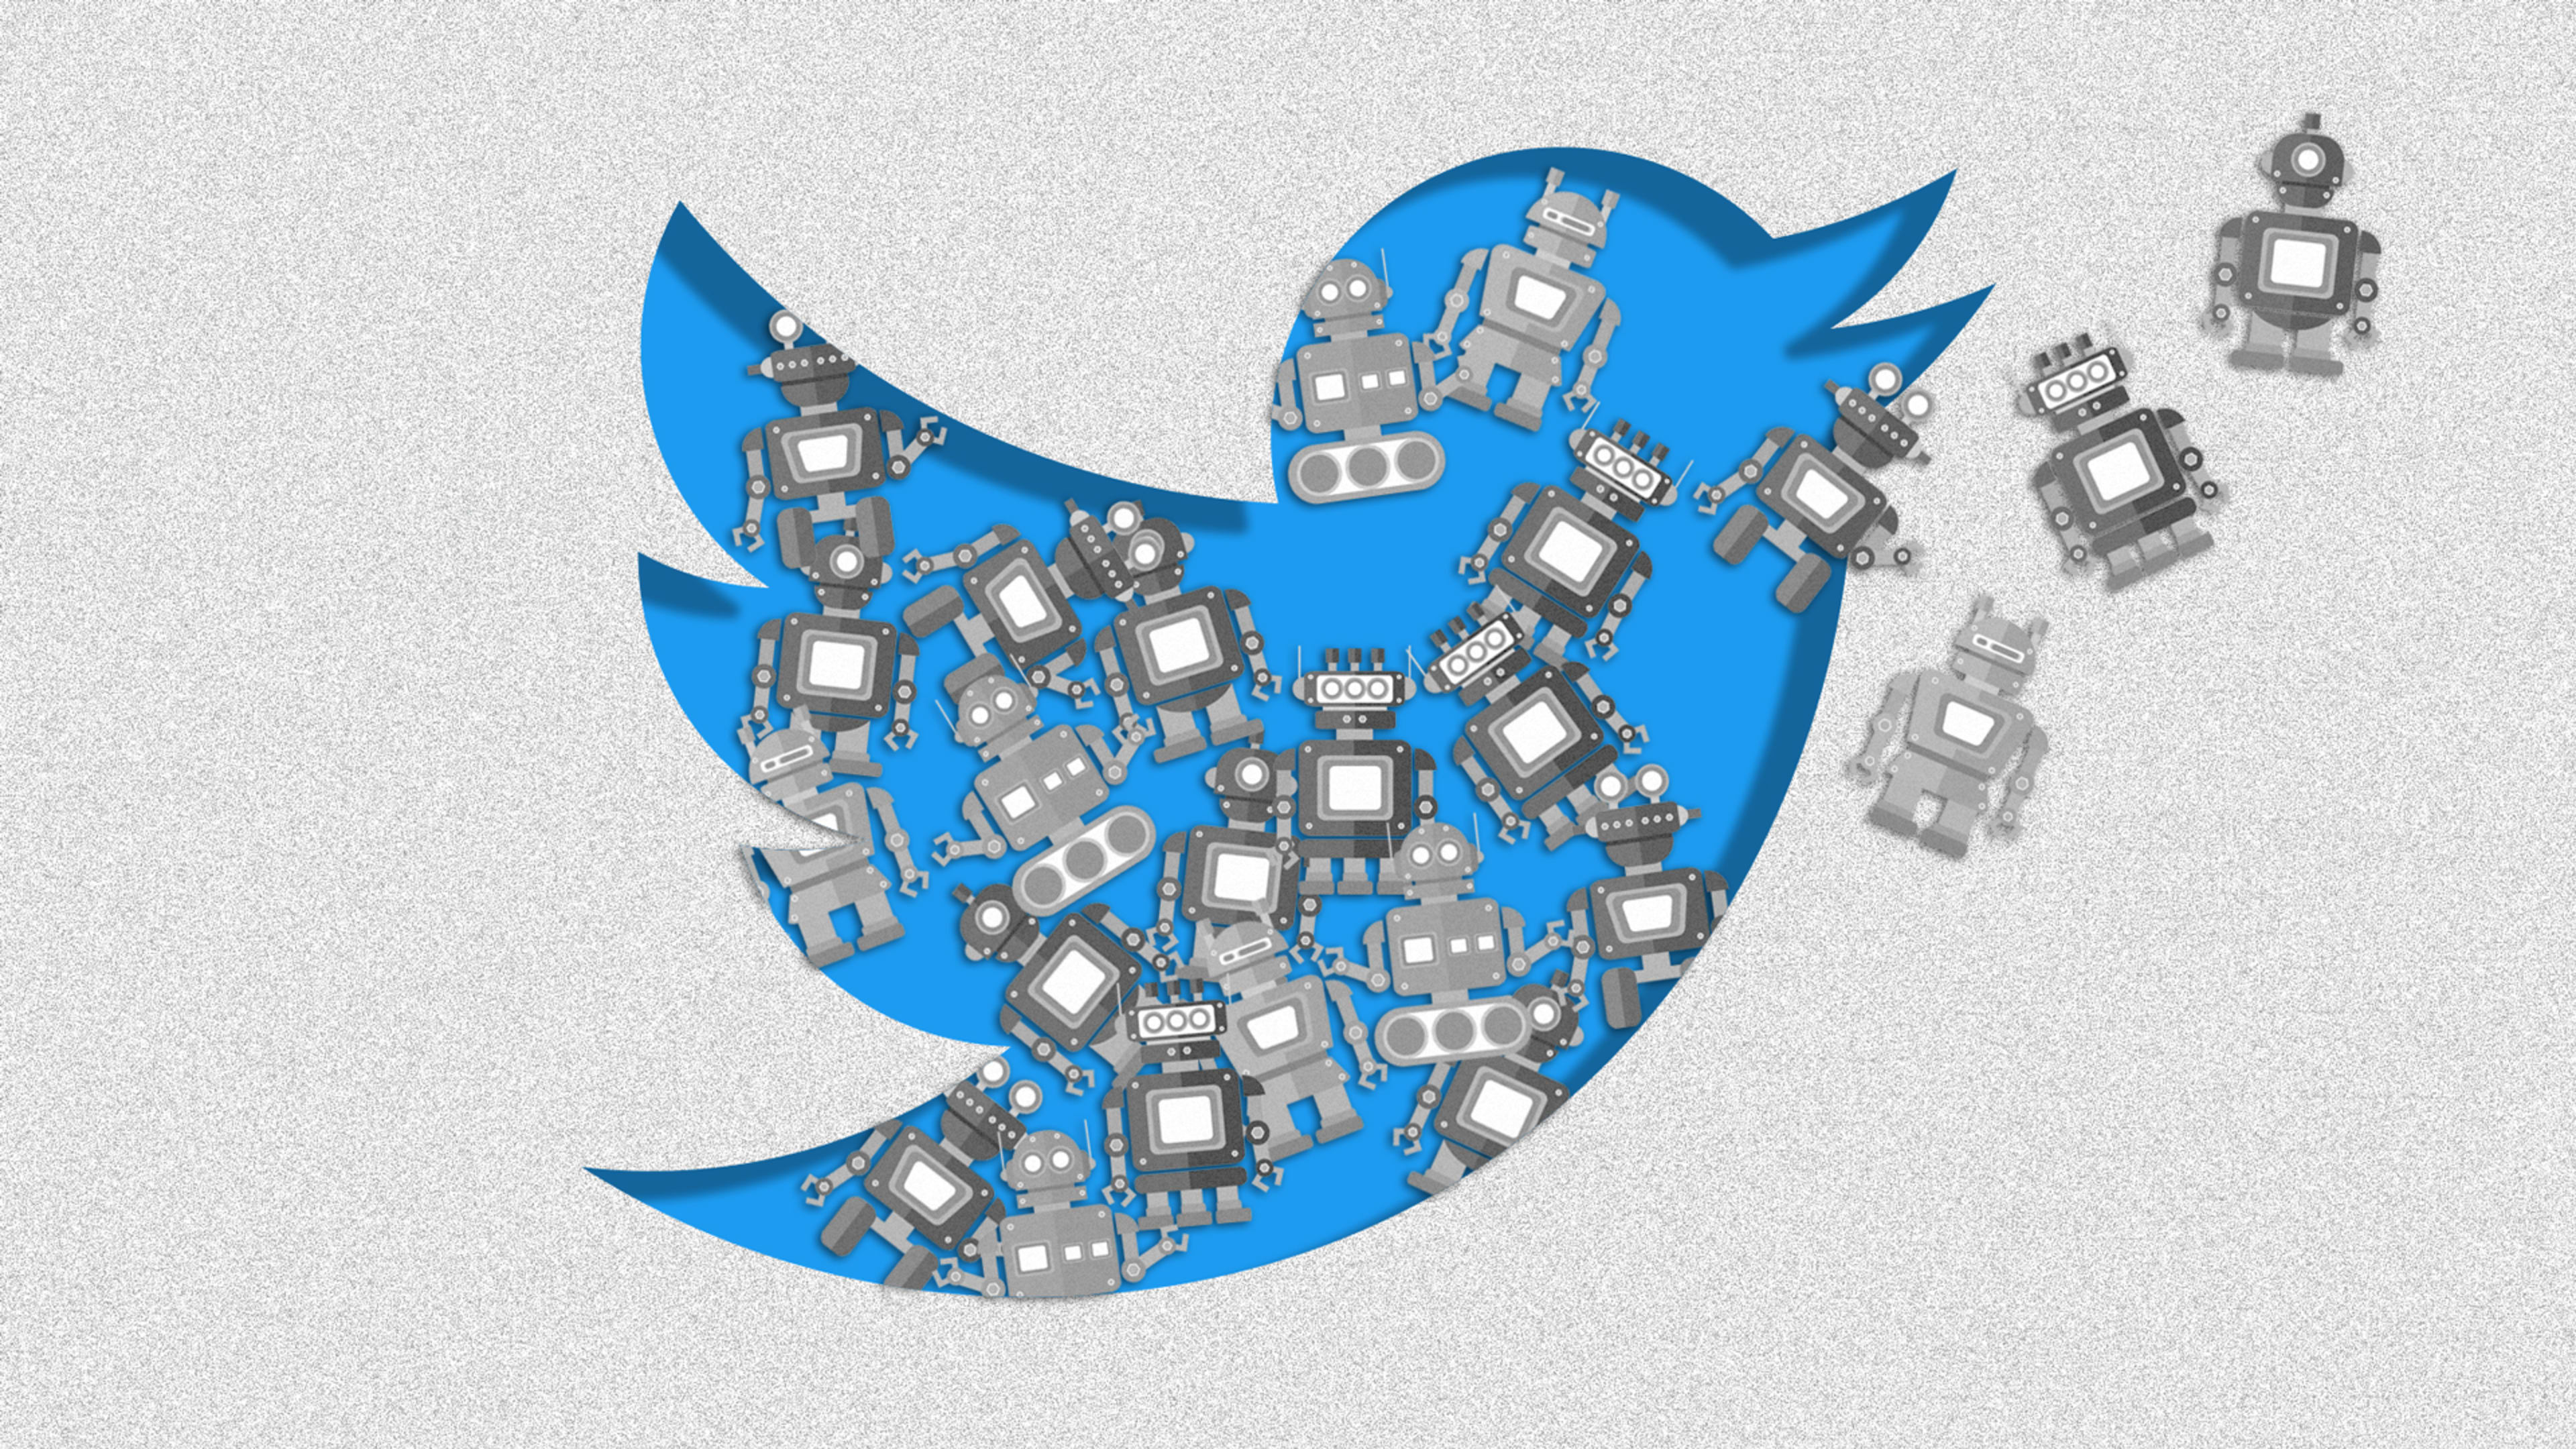 Report: At least 15% of Chinese Twitter accounts are likely bots